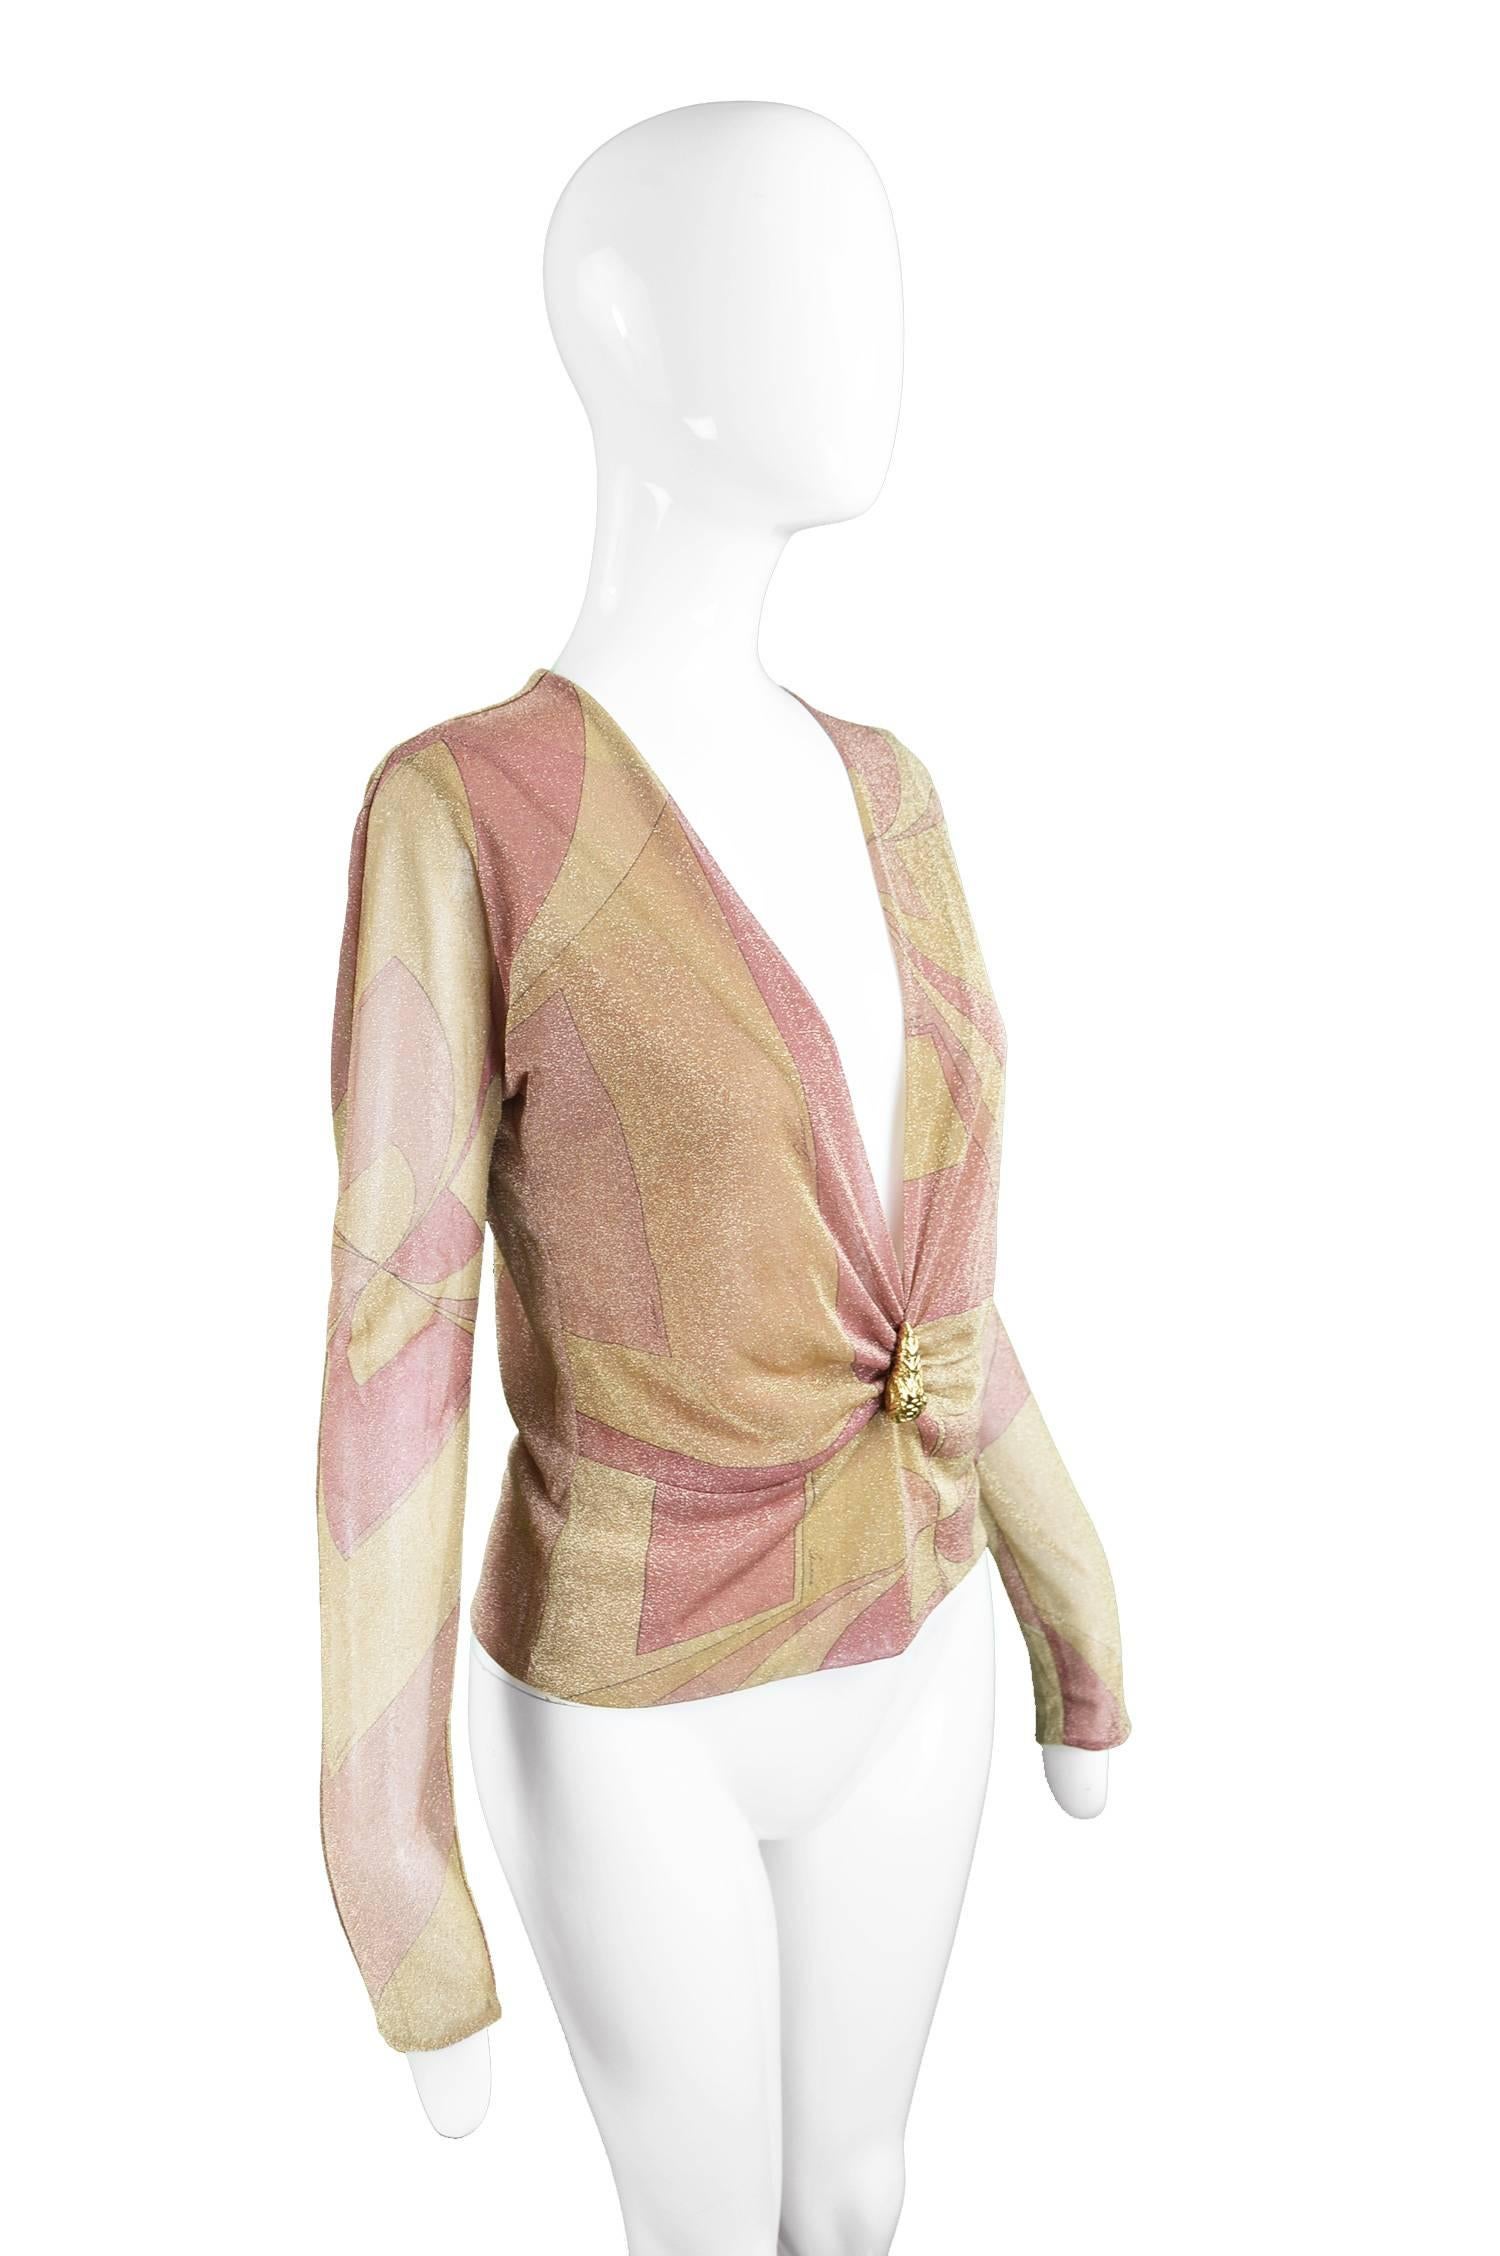 Tom Ford for Gucci Plunging Neckline Gold and Pink Lurex Blouse, A / W 2000 In Good Condition In Doncaster, South Yorkshire